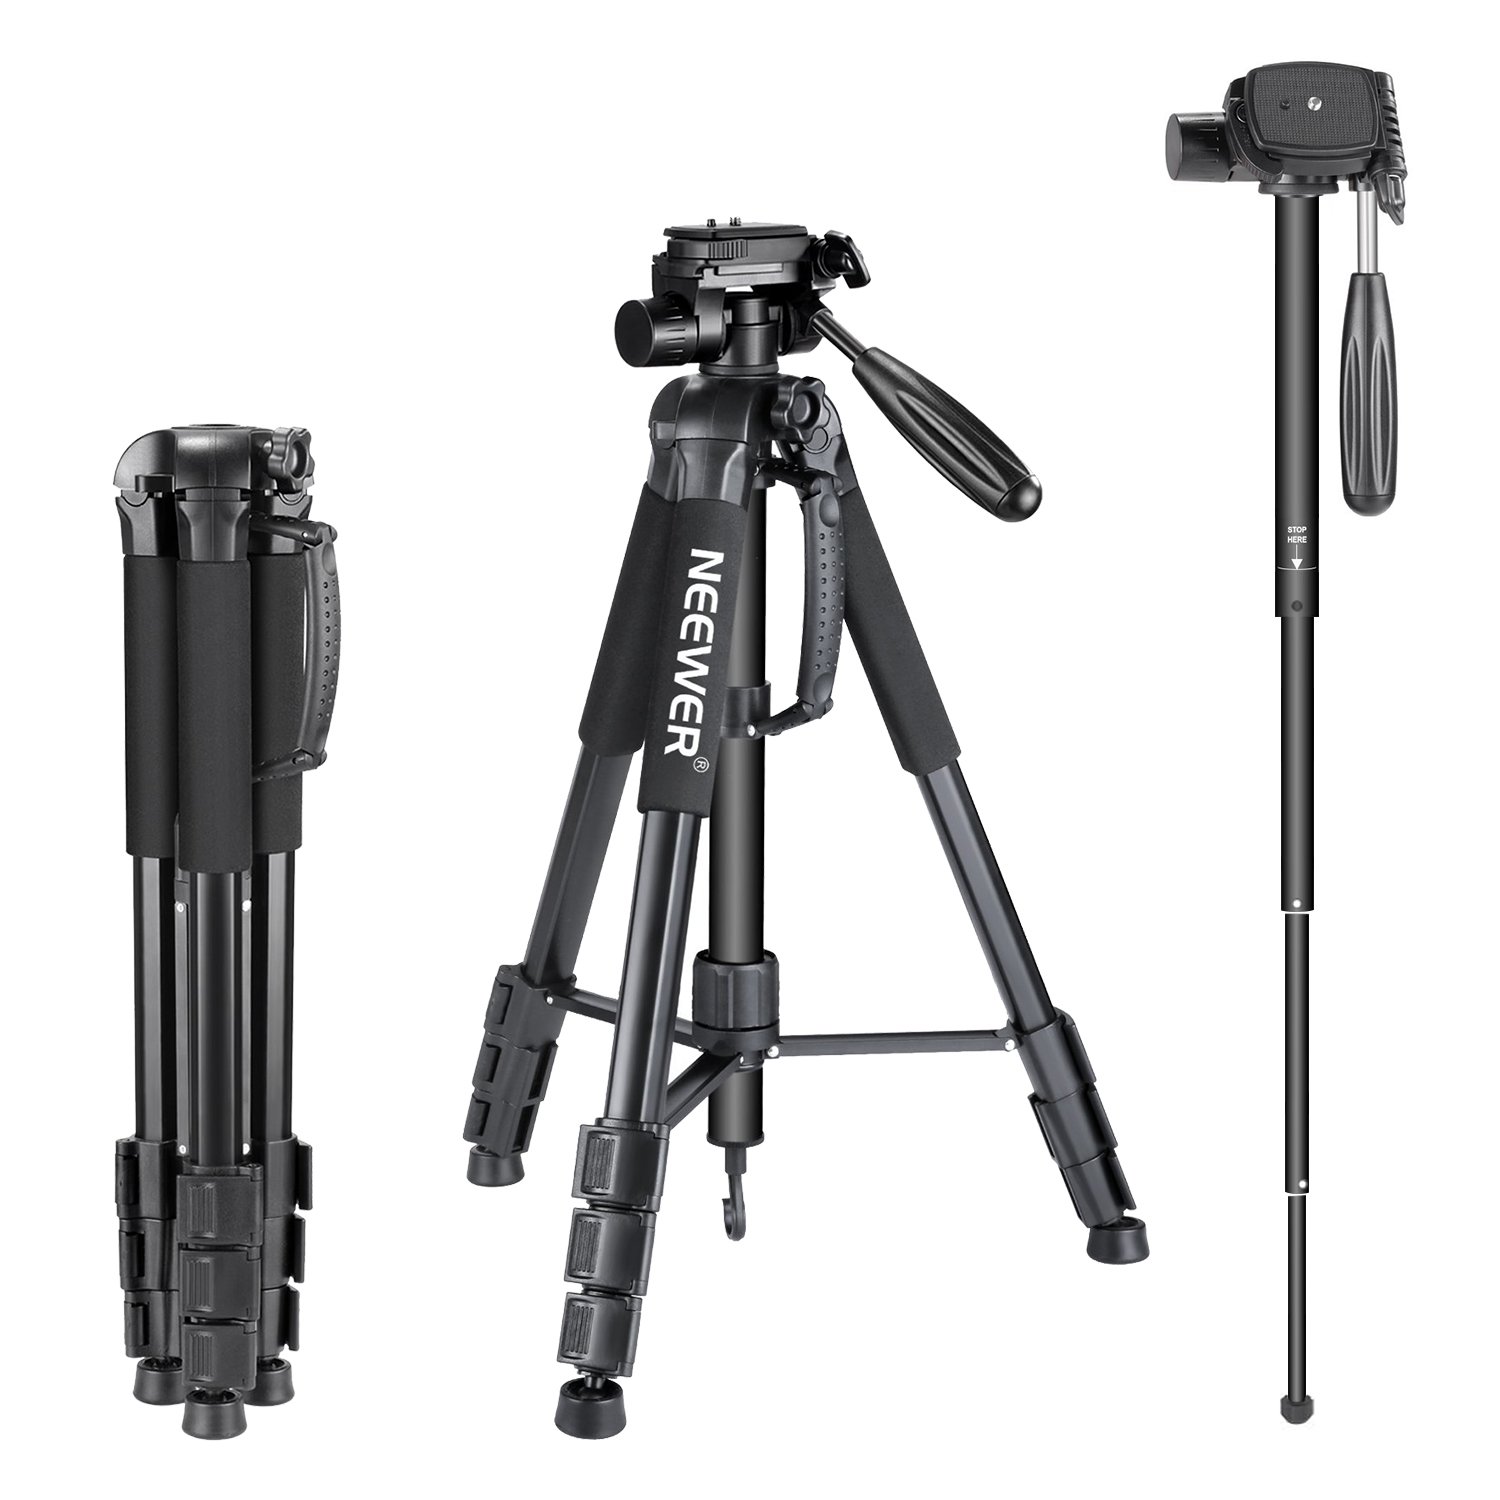 Neewer Portable Aluminum Alloy Camera 2 in 1 Tripod Monopod Max. 70/177 cm with 3Way Swivel Pan Head and Carrying Bag for DSLR DV Video Camcorder